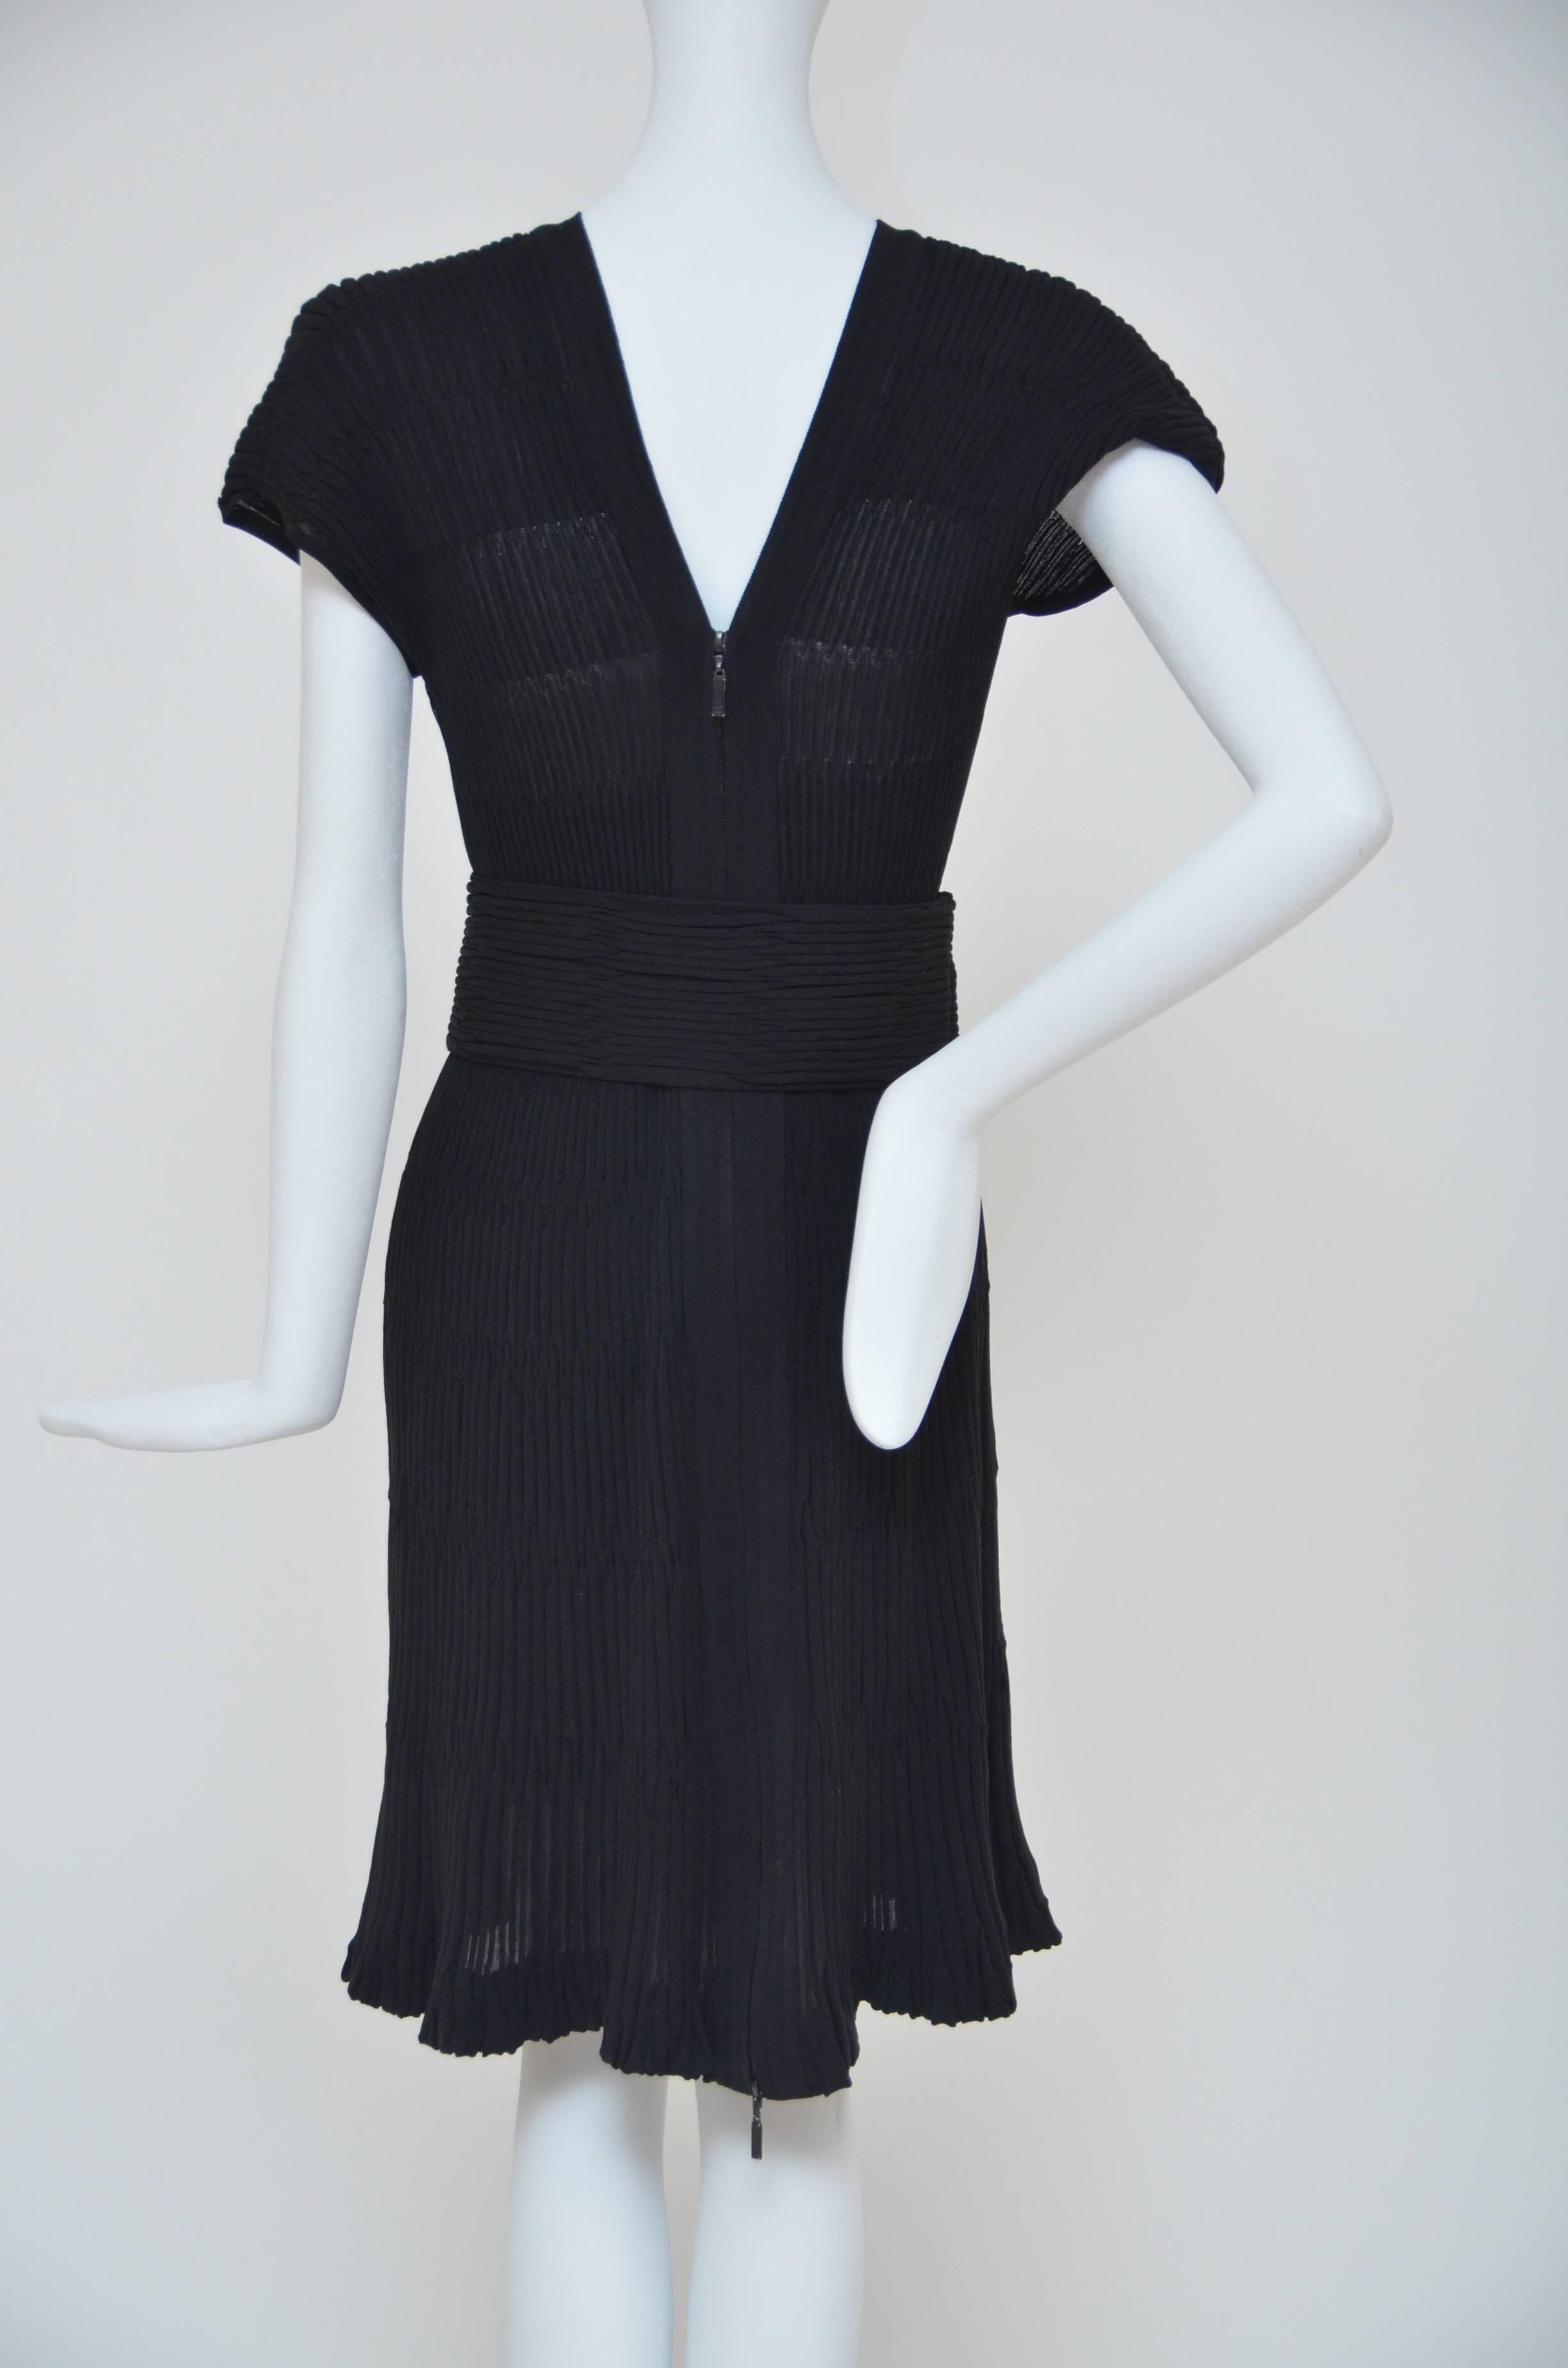 Chanel black knitted dress with removable belt.
Size 42.
Excellent mint condition.
Fabric is slightly stretchy.Zipper closure.
Made in France.

FINAL SALE.